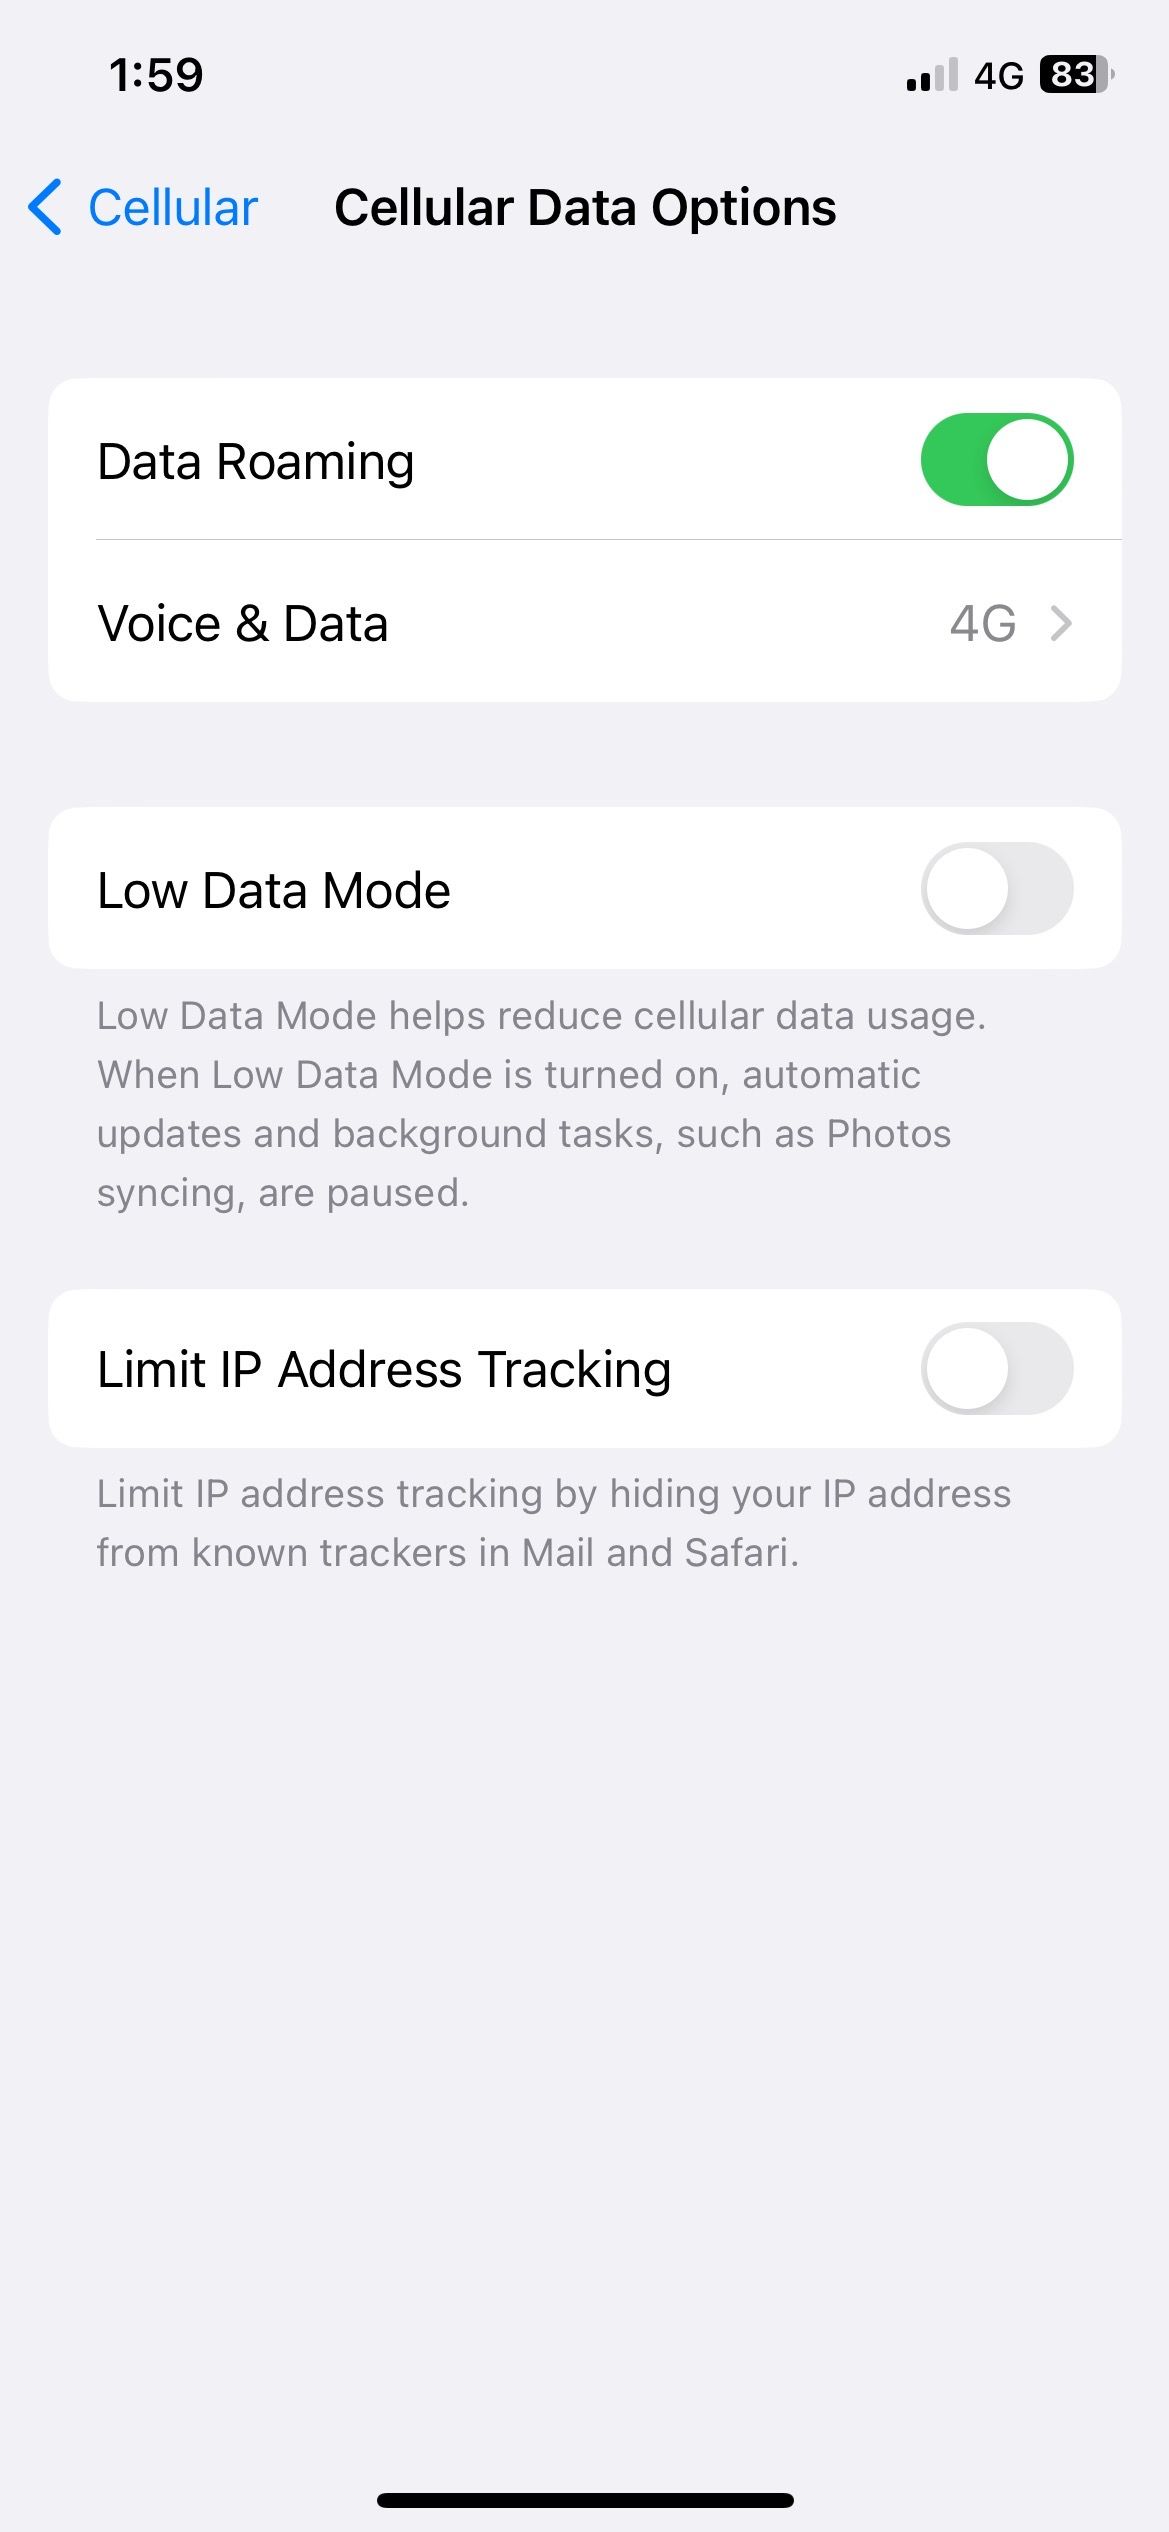 Turn off Low Data Mode